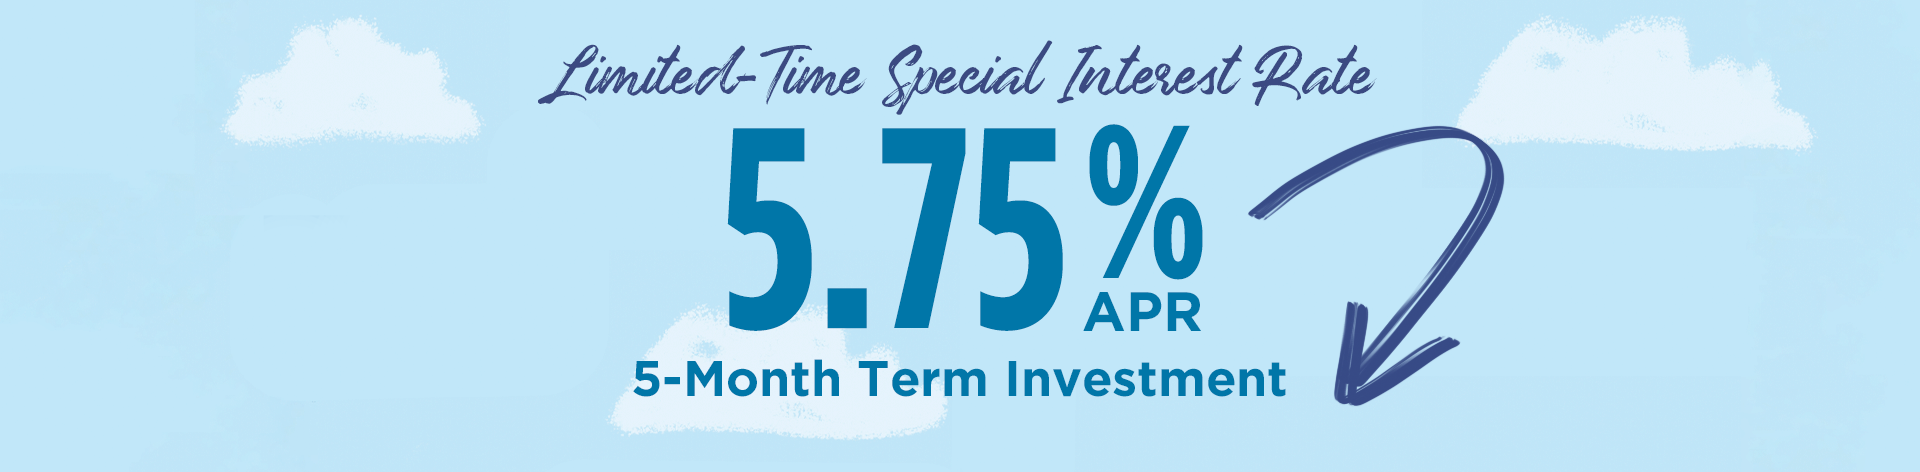 Limited-Time Special Interest Rate: 5.75% APR 5-Month Term Investment